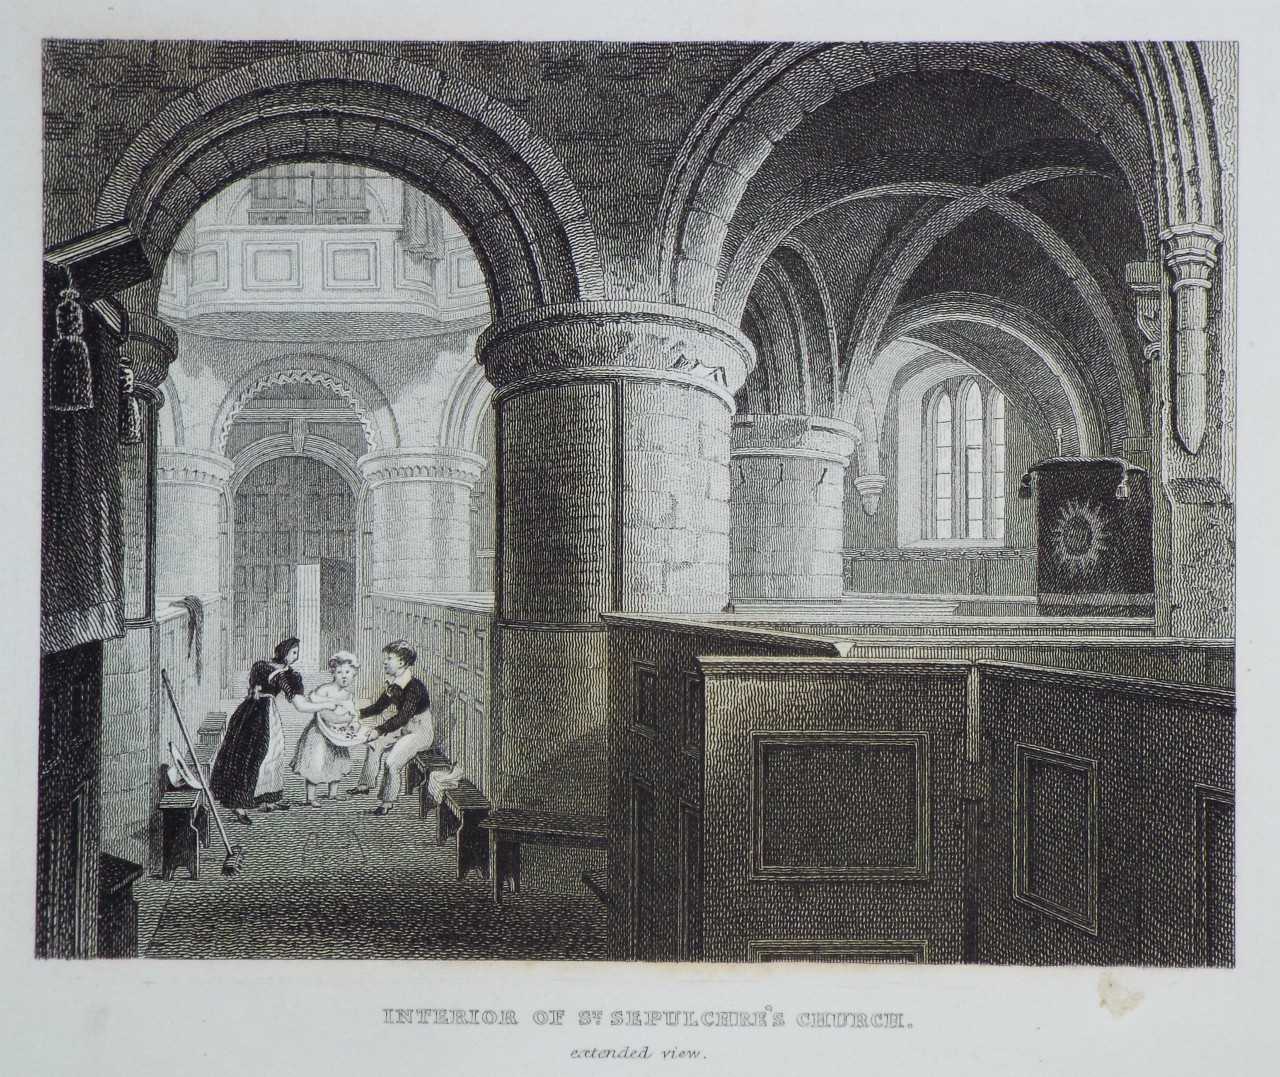 Print - Interior of St. Sepulchre's Church. extended view.